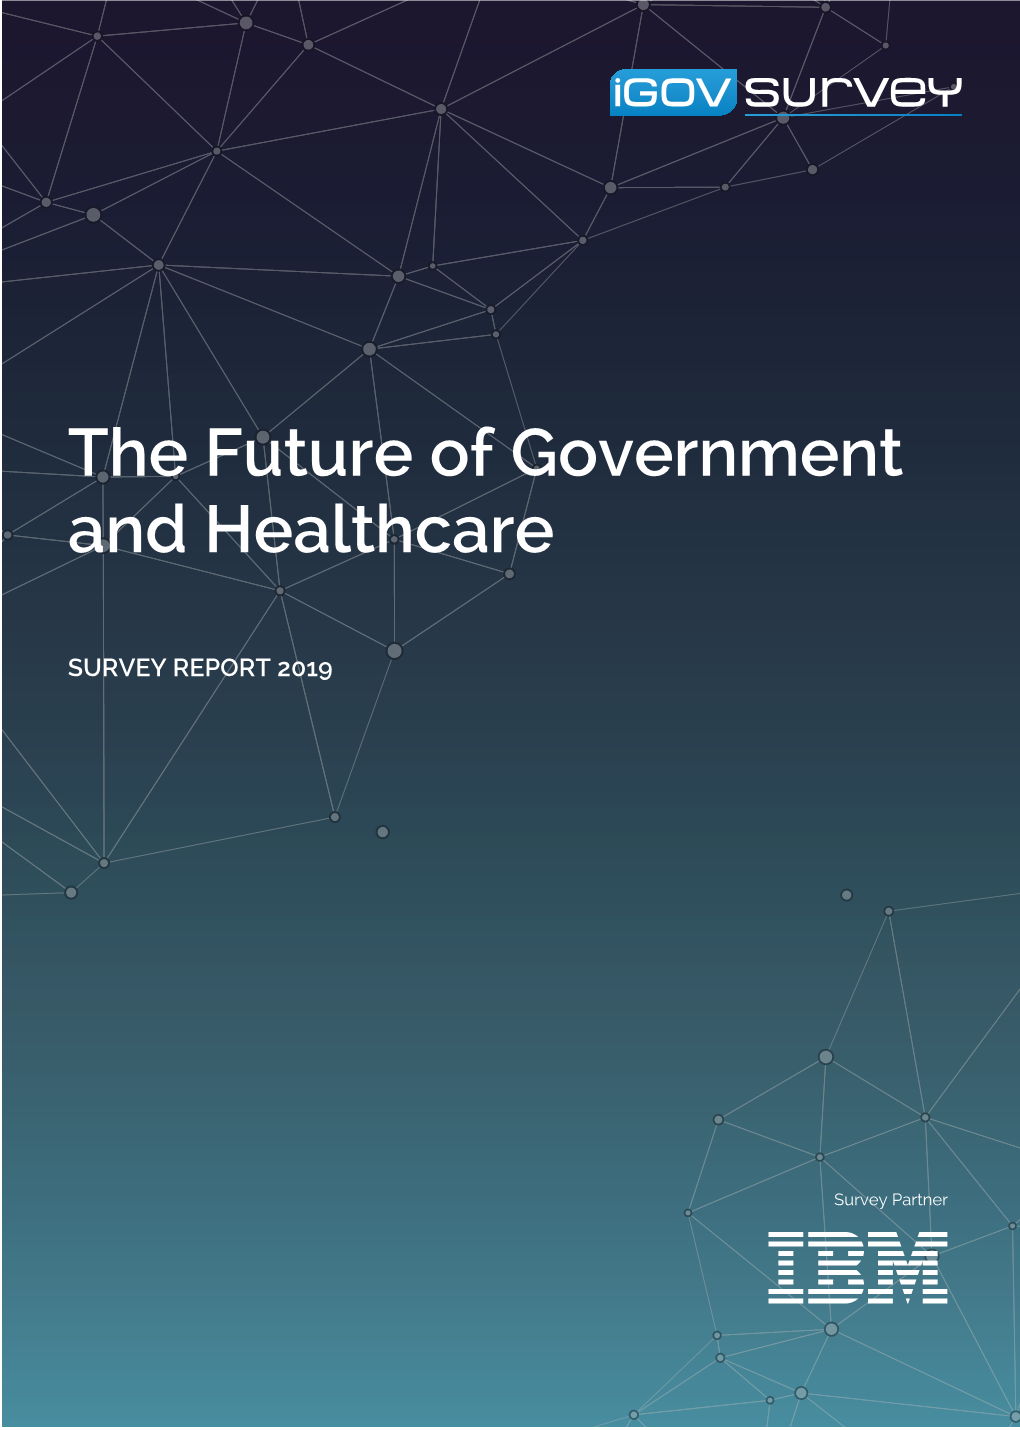 The Future of Government and Healthcare